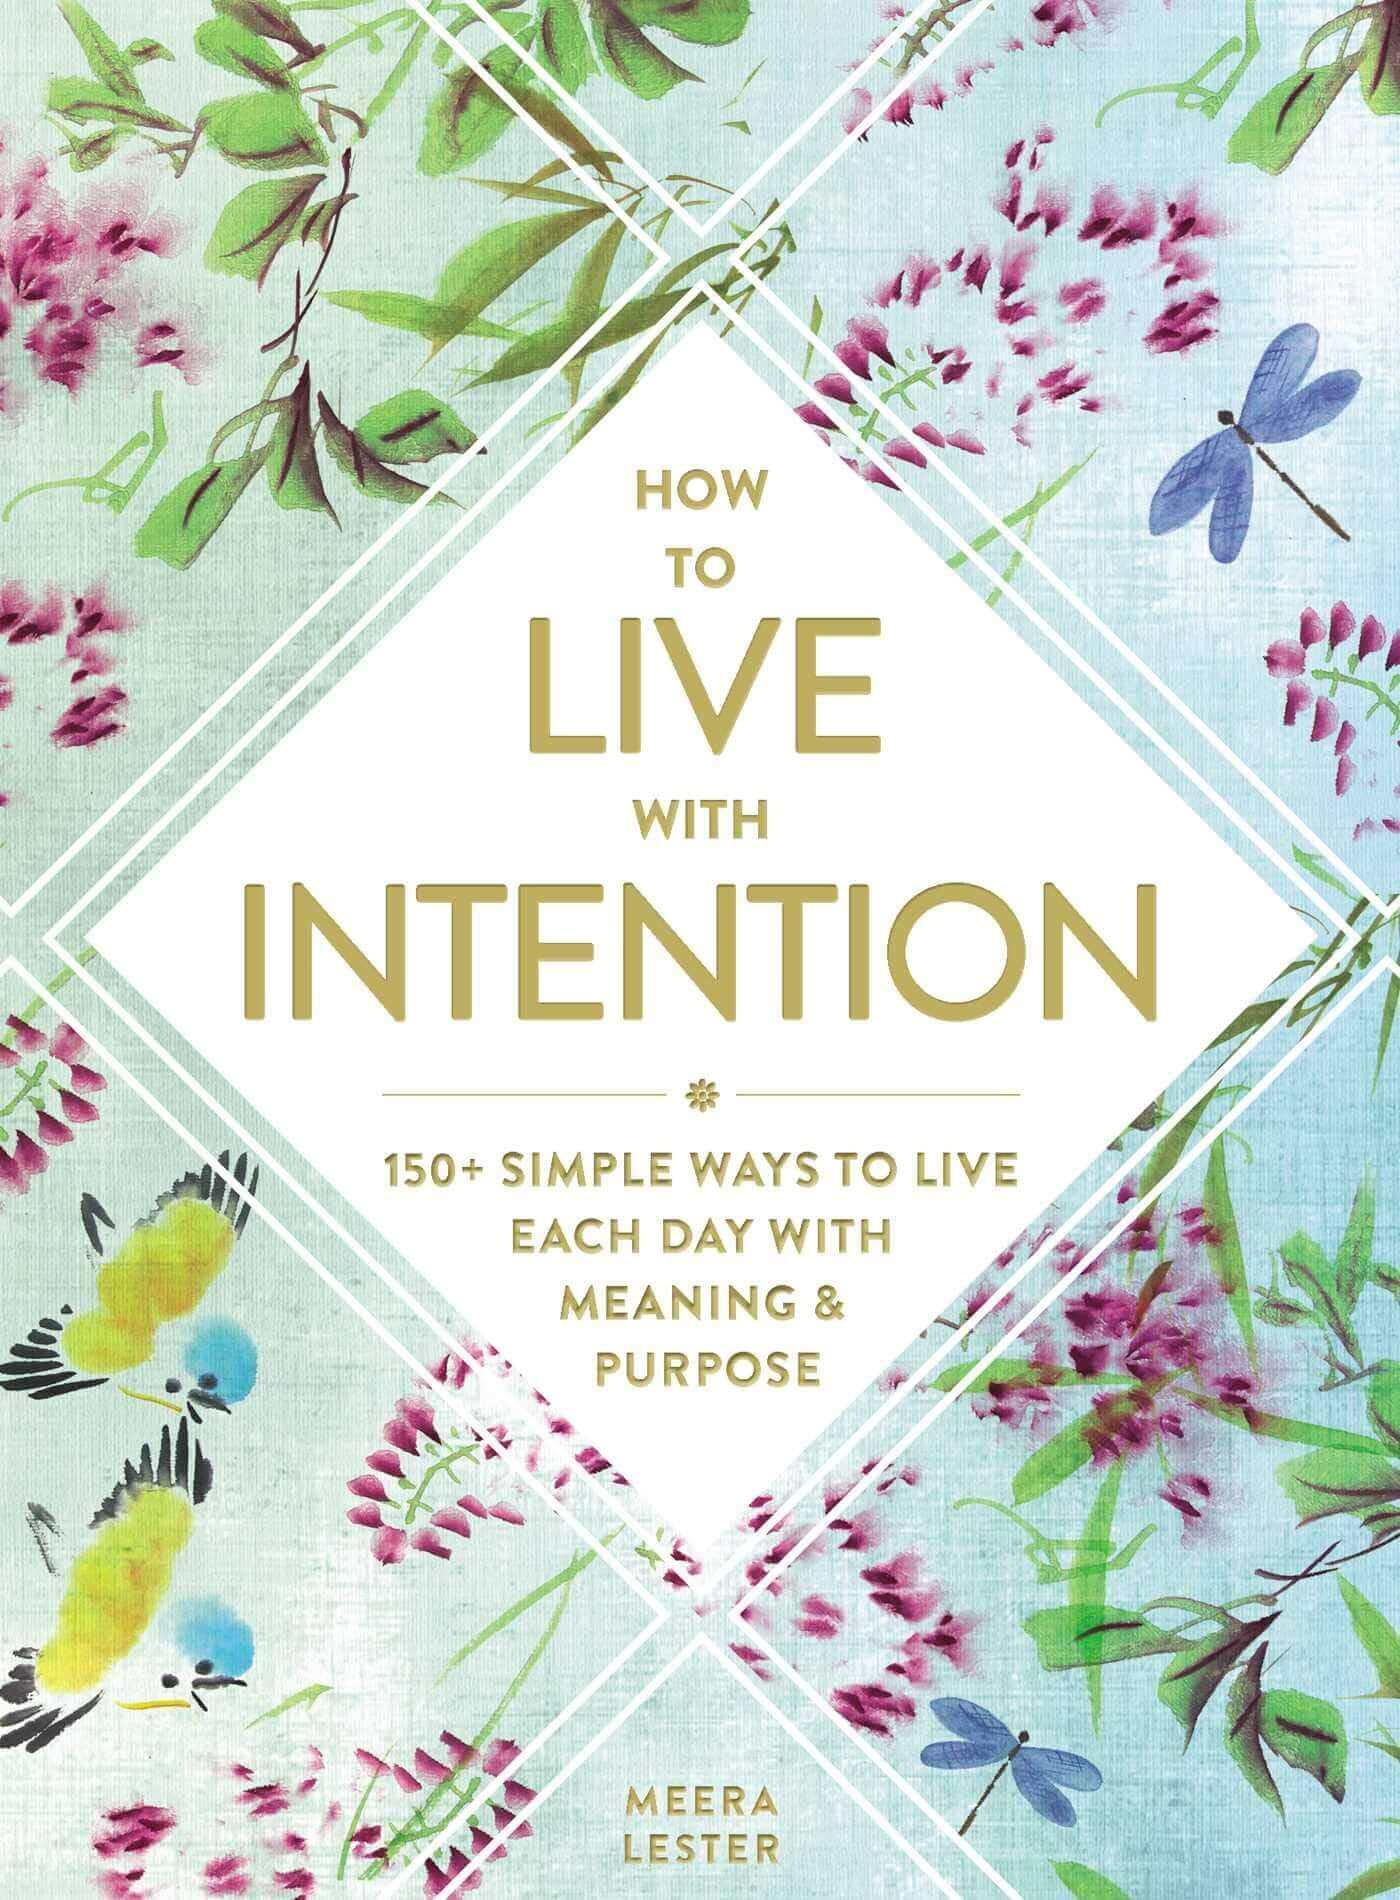 HOW TO LIVE WITH INTENTION: 150+ SIMPLE WAYS TO LIVE EACH DAY WITH MEANING & PURPOSE at $15 only from Spiral Rain